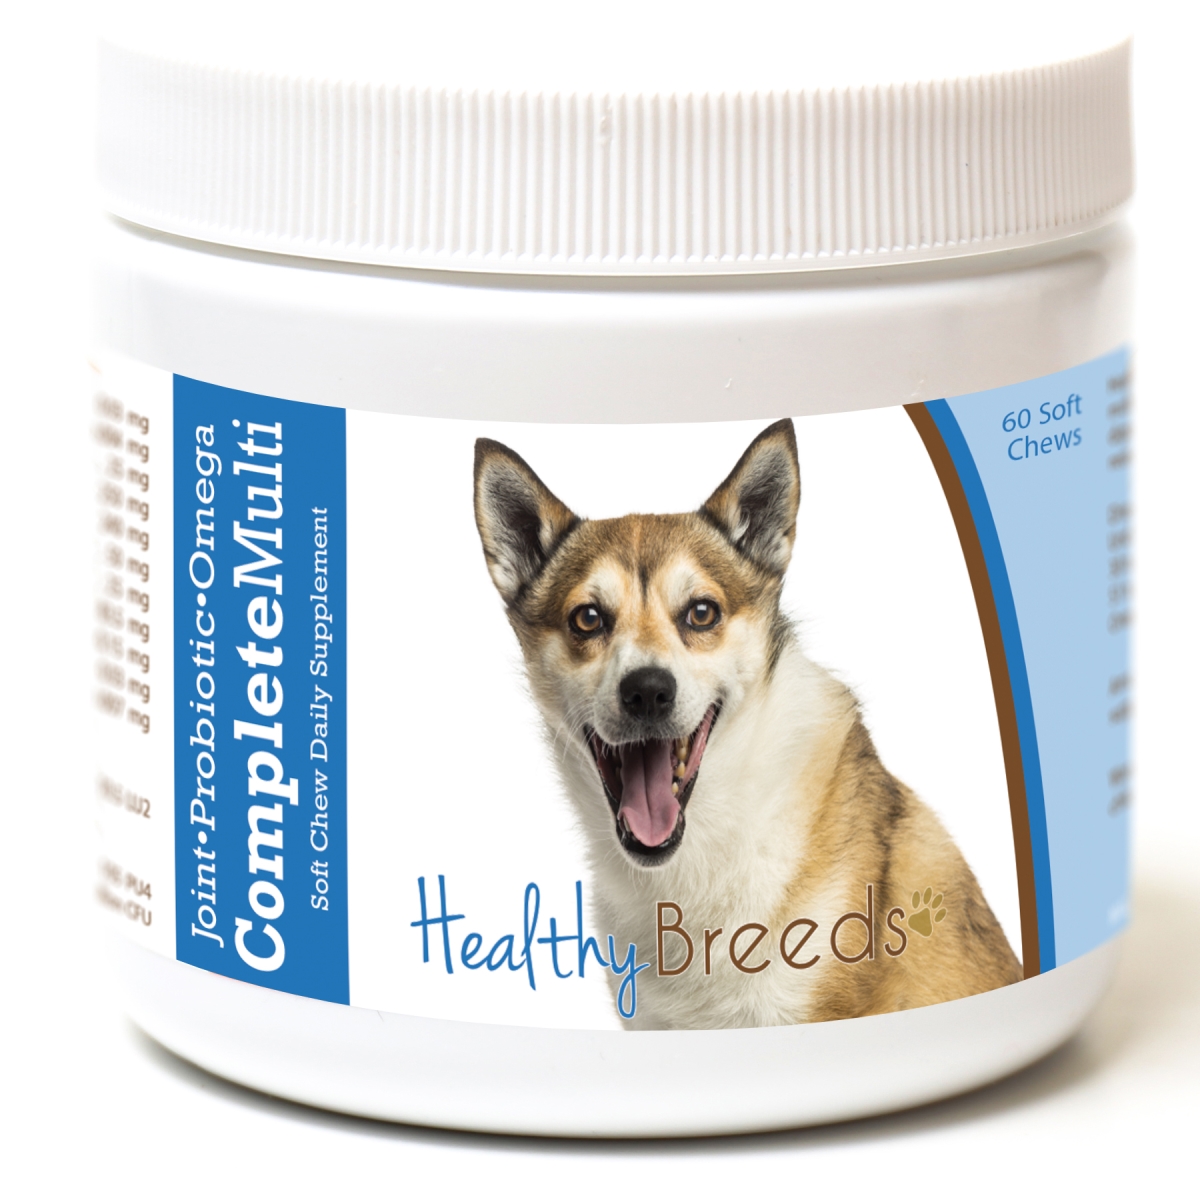 Picture of Healthy Breeds 192959008586 Norwegian Lundehund All in One Multivitamin Soft Chew - 60 Count